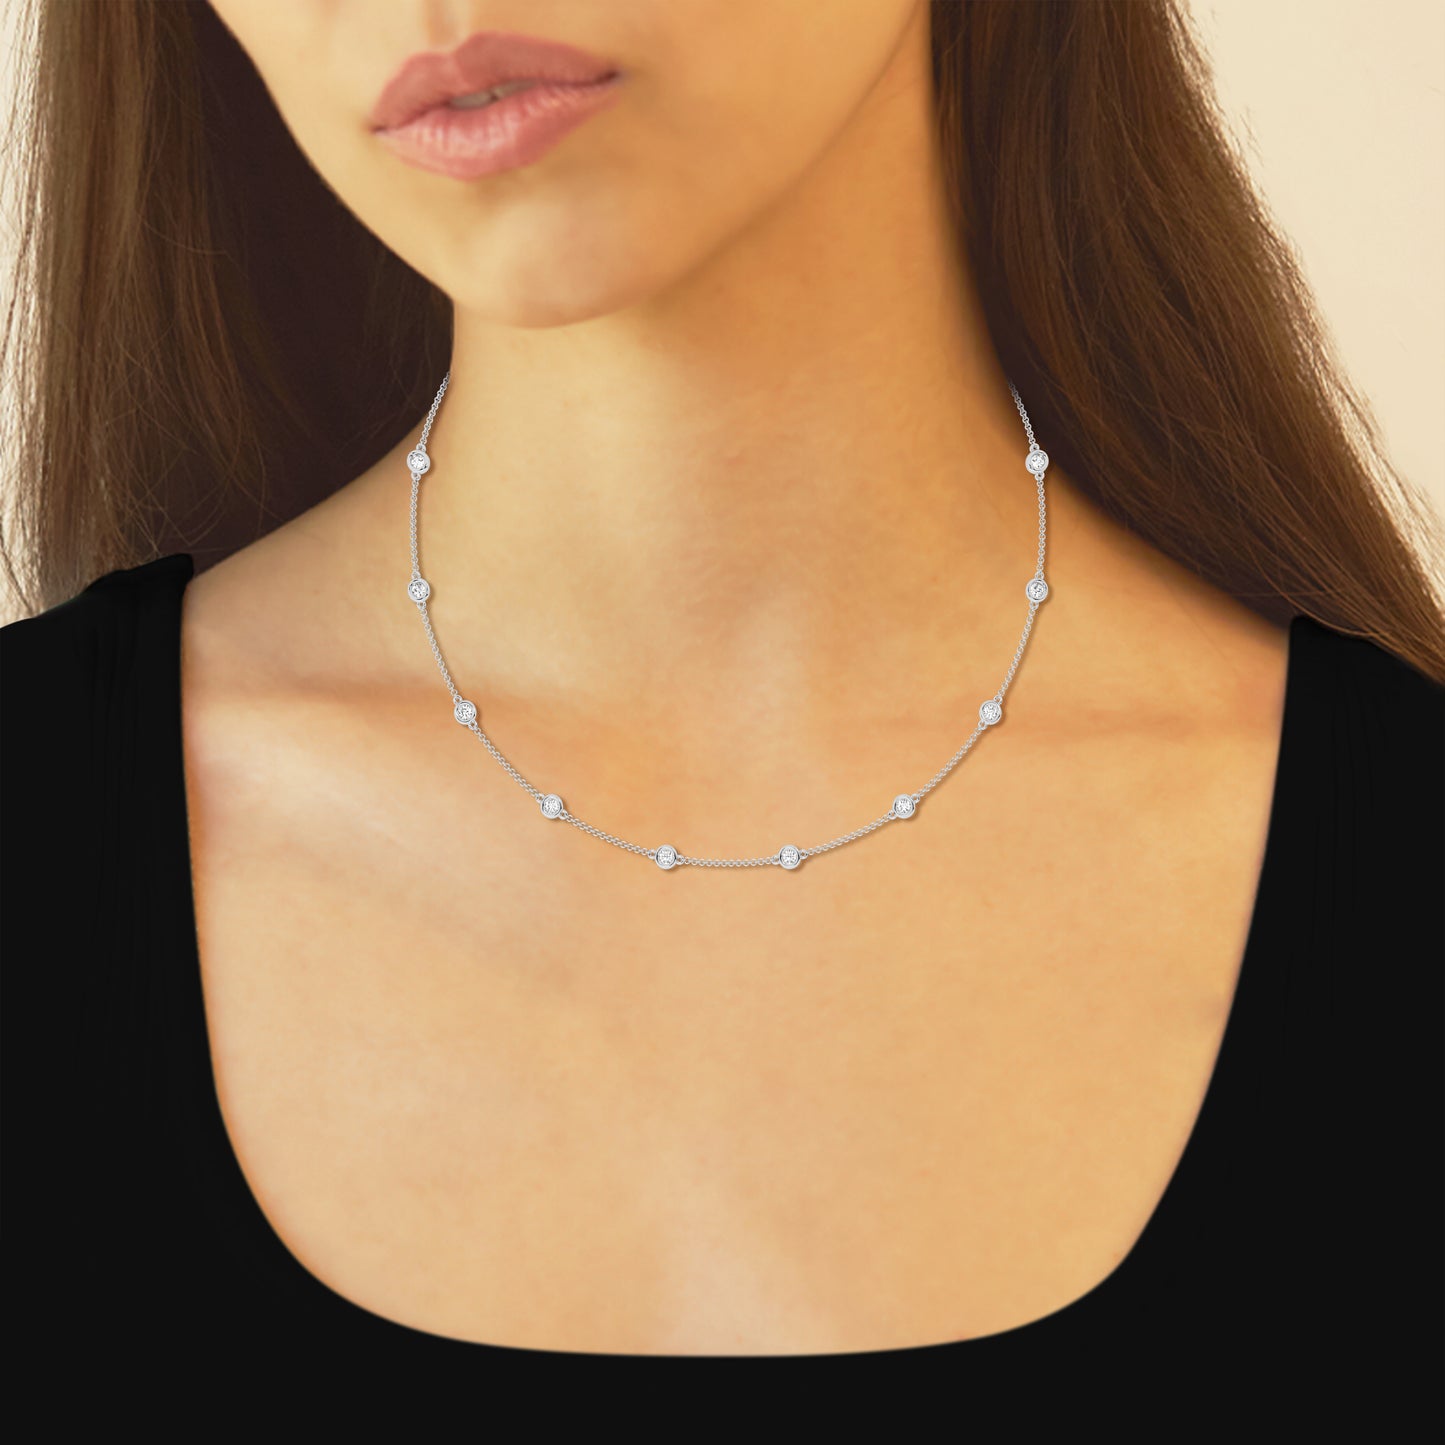 2.00 cttw Round Diamonds by the Yard Necklace